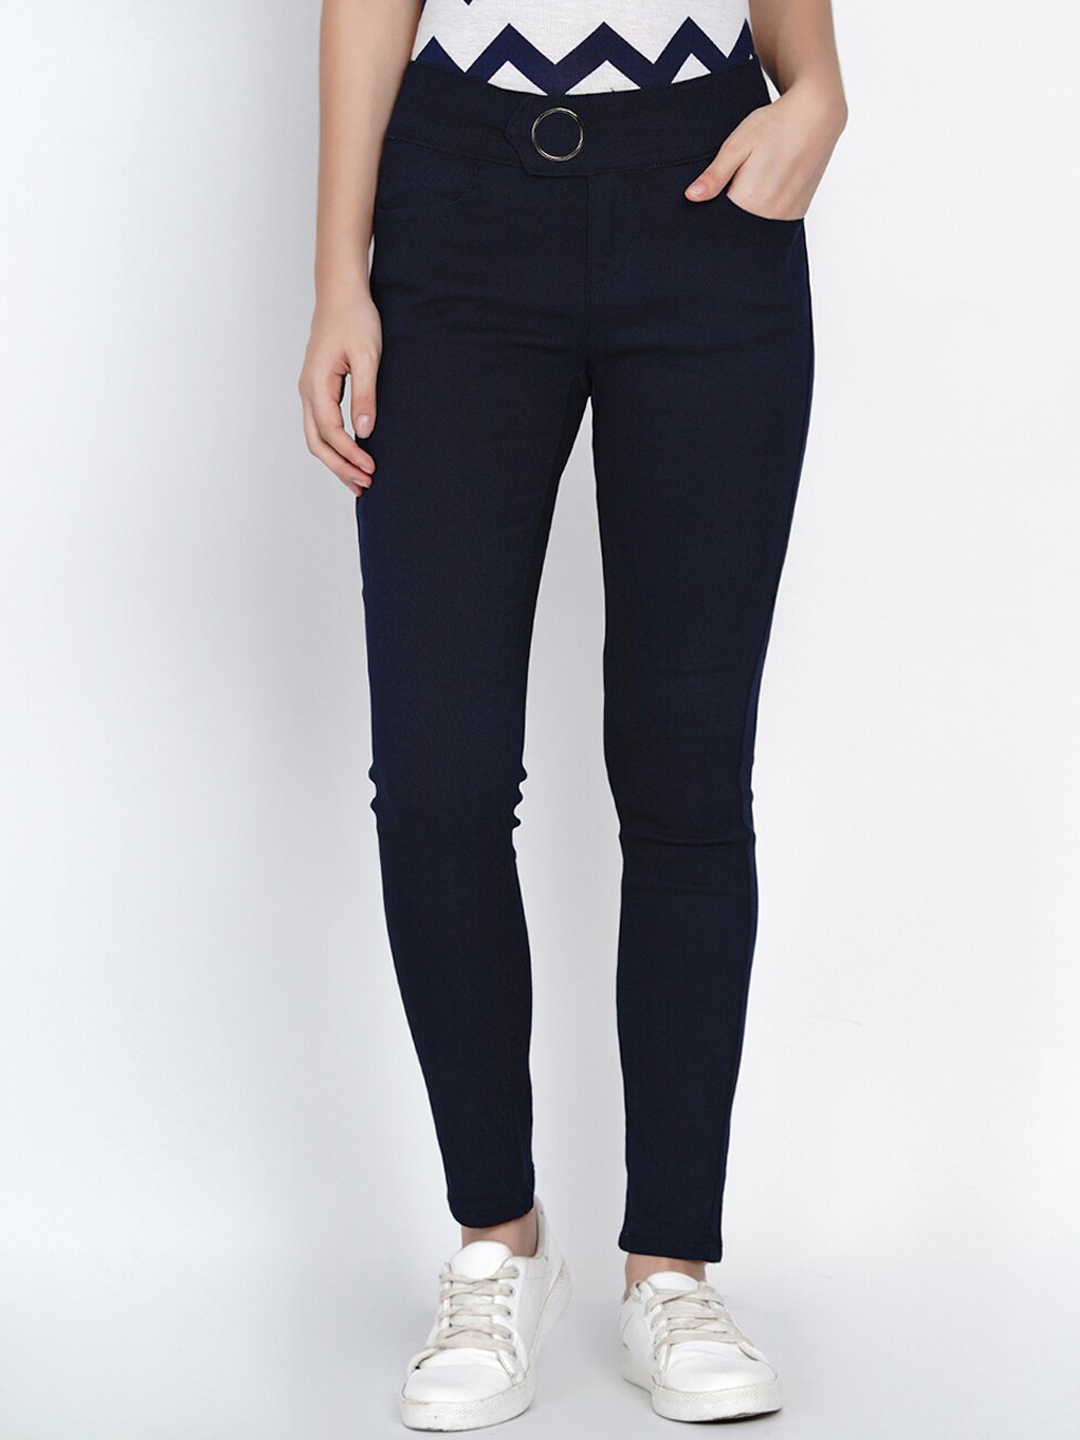 Buy Deal Jeans Women Navy Blue Slim Fit Solid Chinos - Trousers for ...